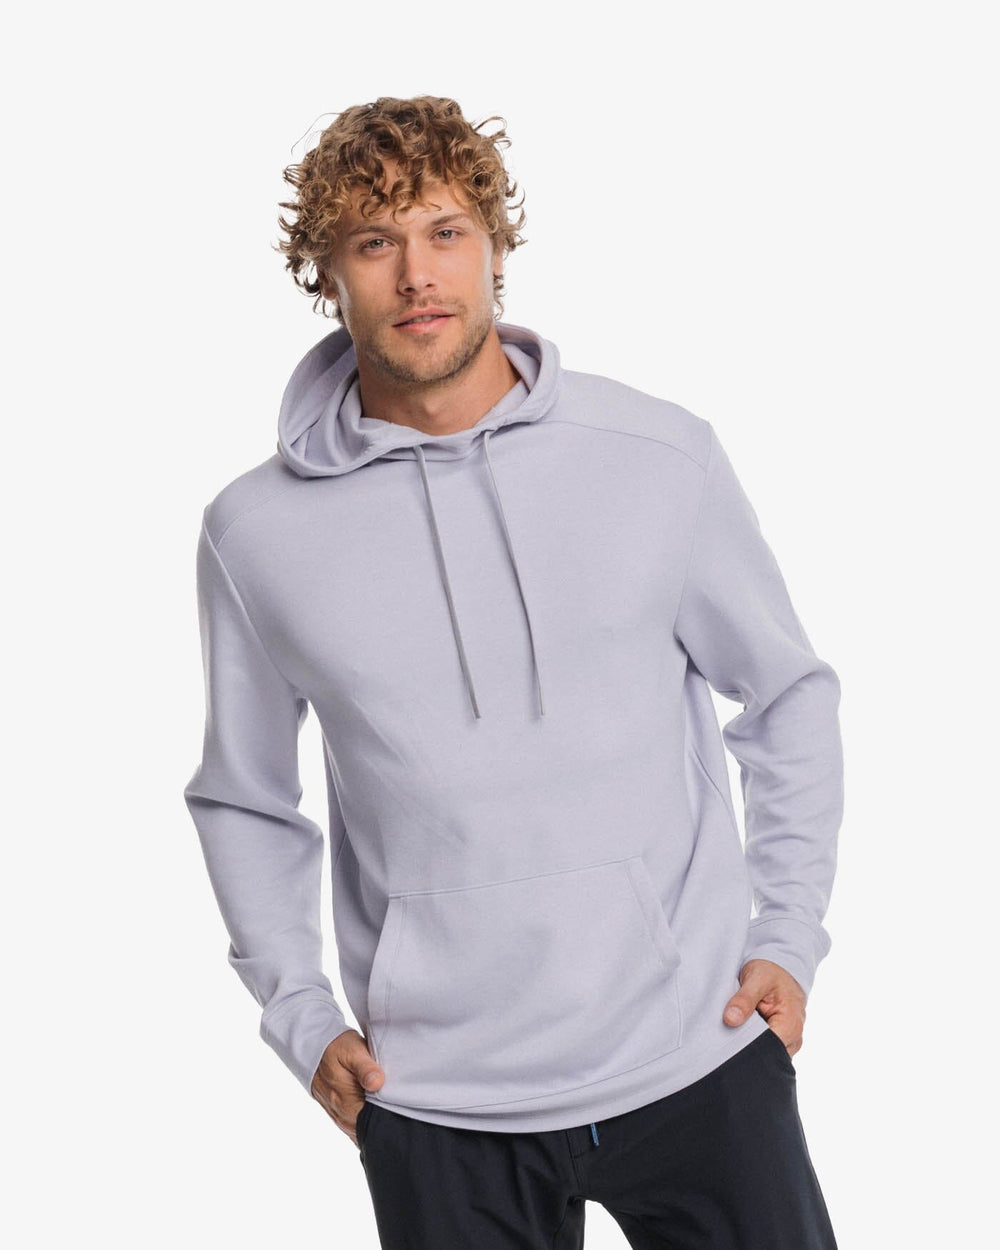 The front view of the Southern Tide Stratford Heather Interlock Hoodie by Southern Tide - Heather Platinum Grey